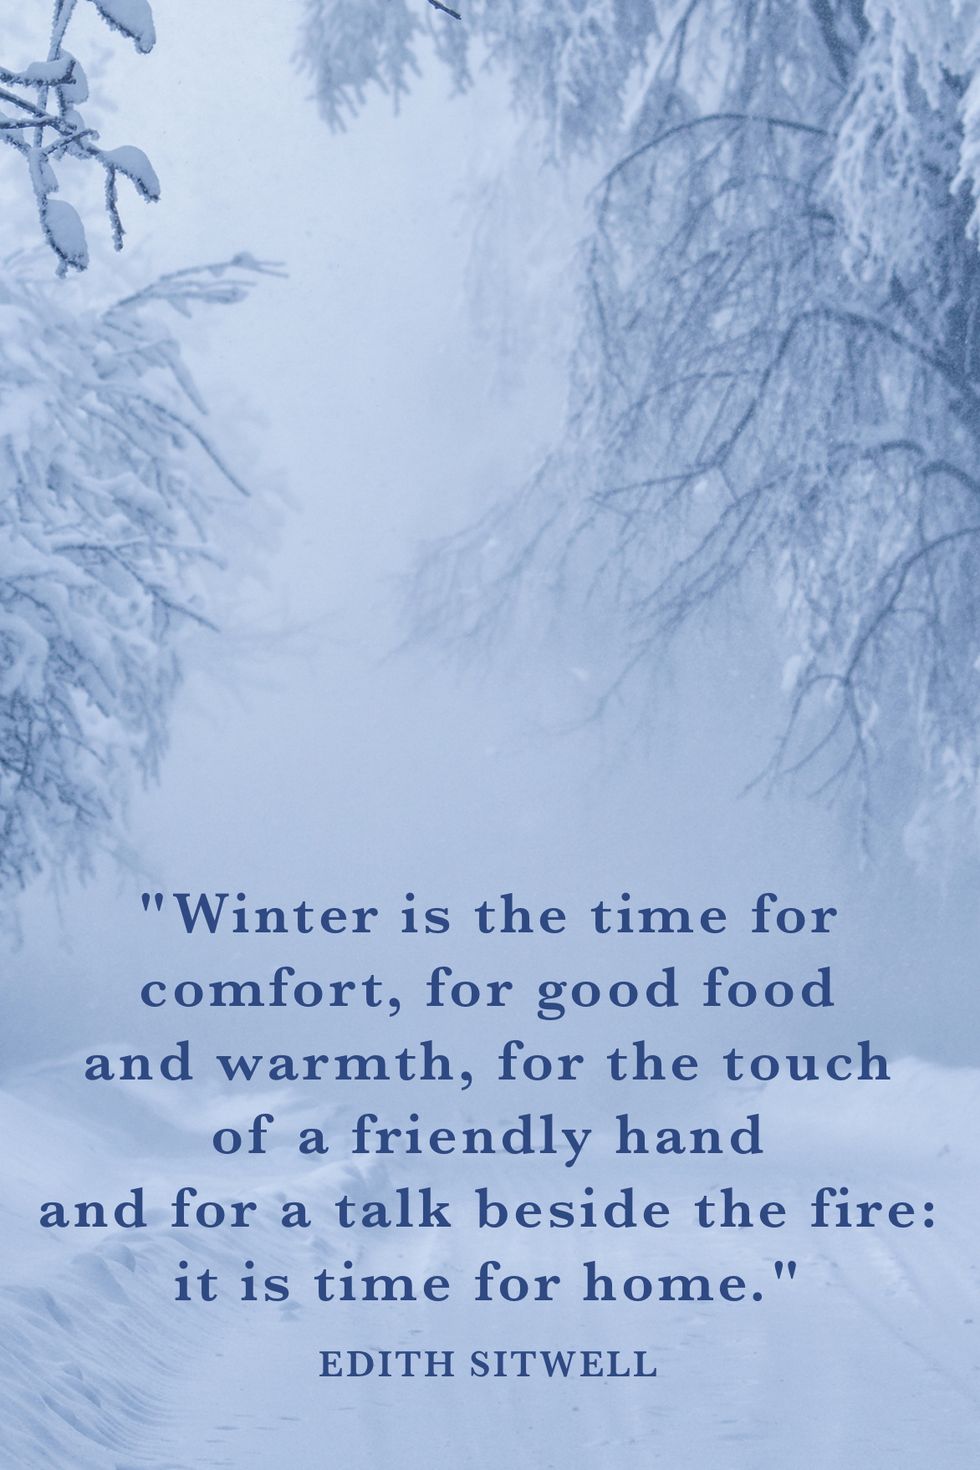 sitwell winter quotes